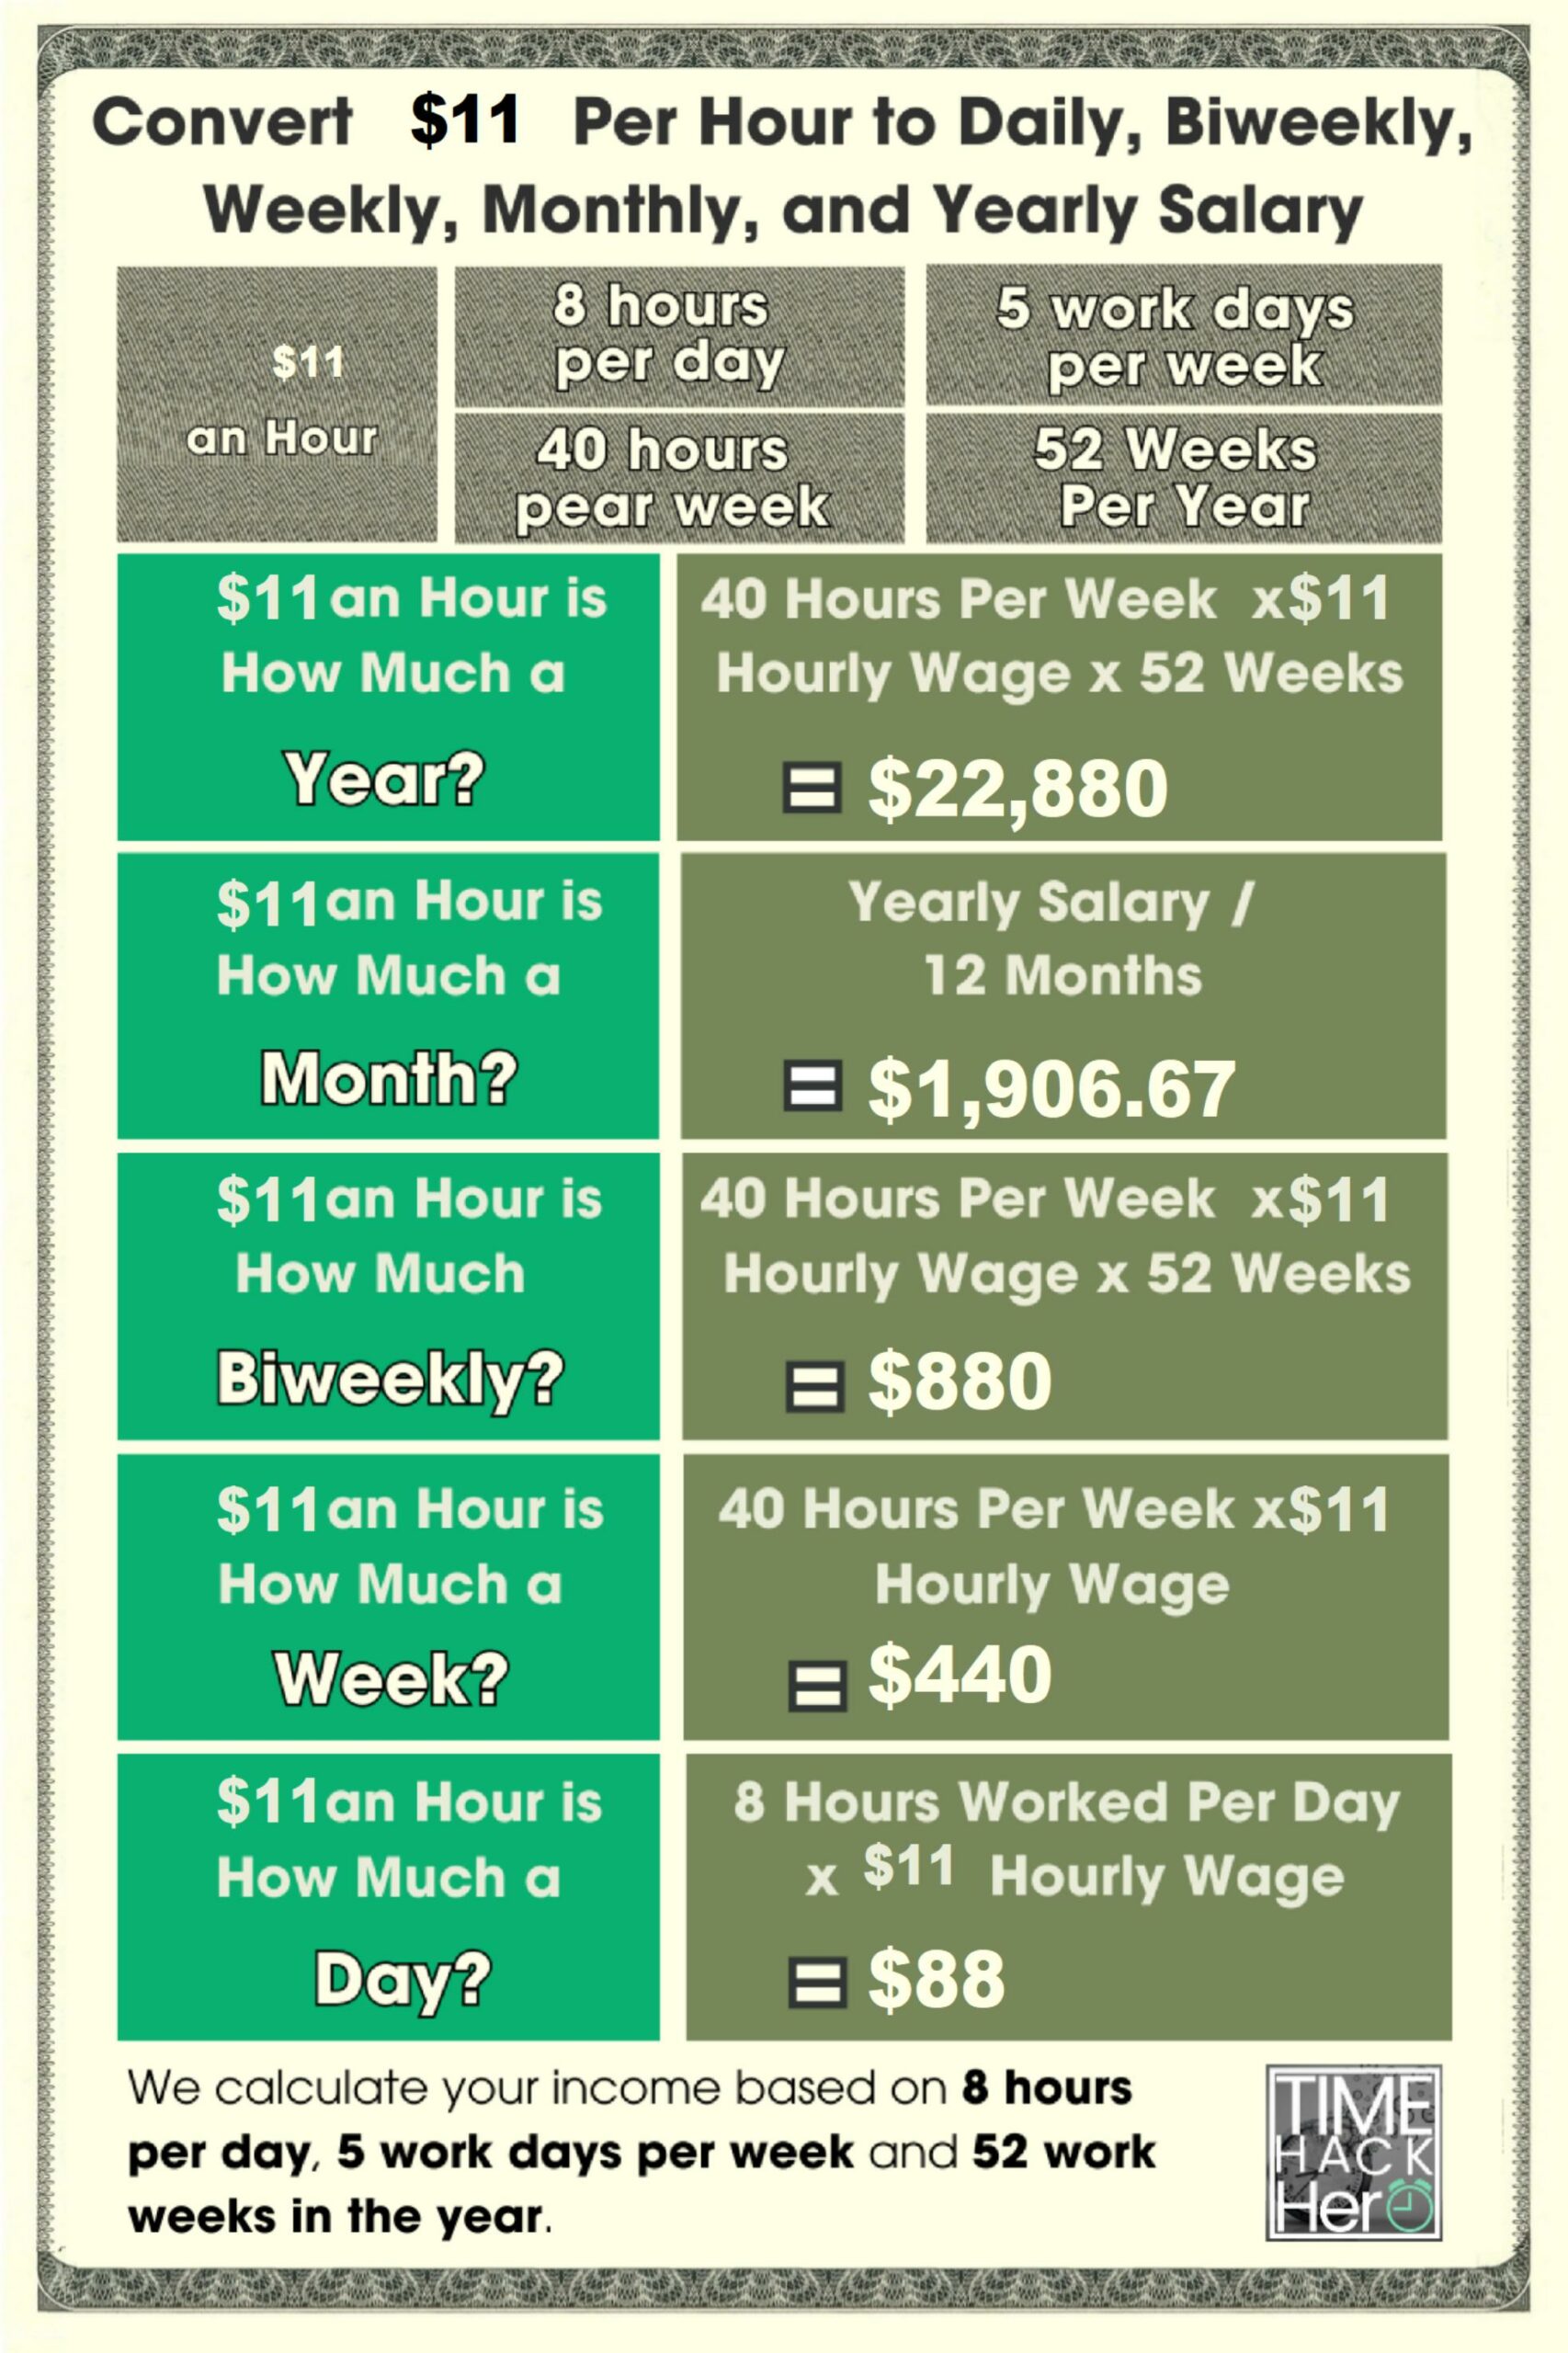 Convert $11 Per Hour to Weekly, Monthly, and Yearly Salary